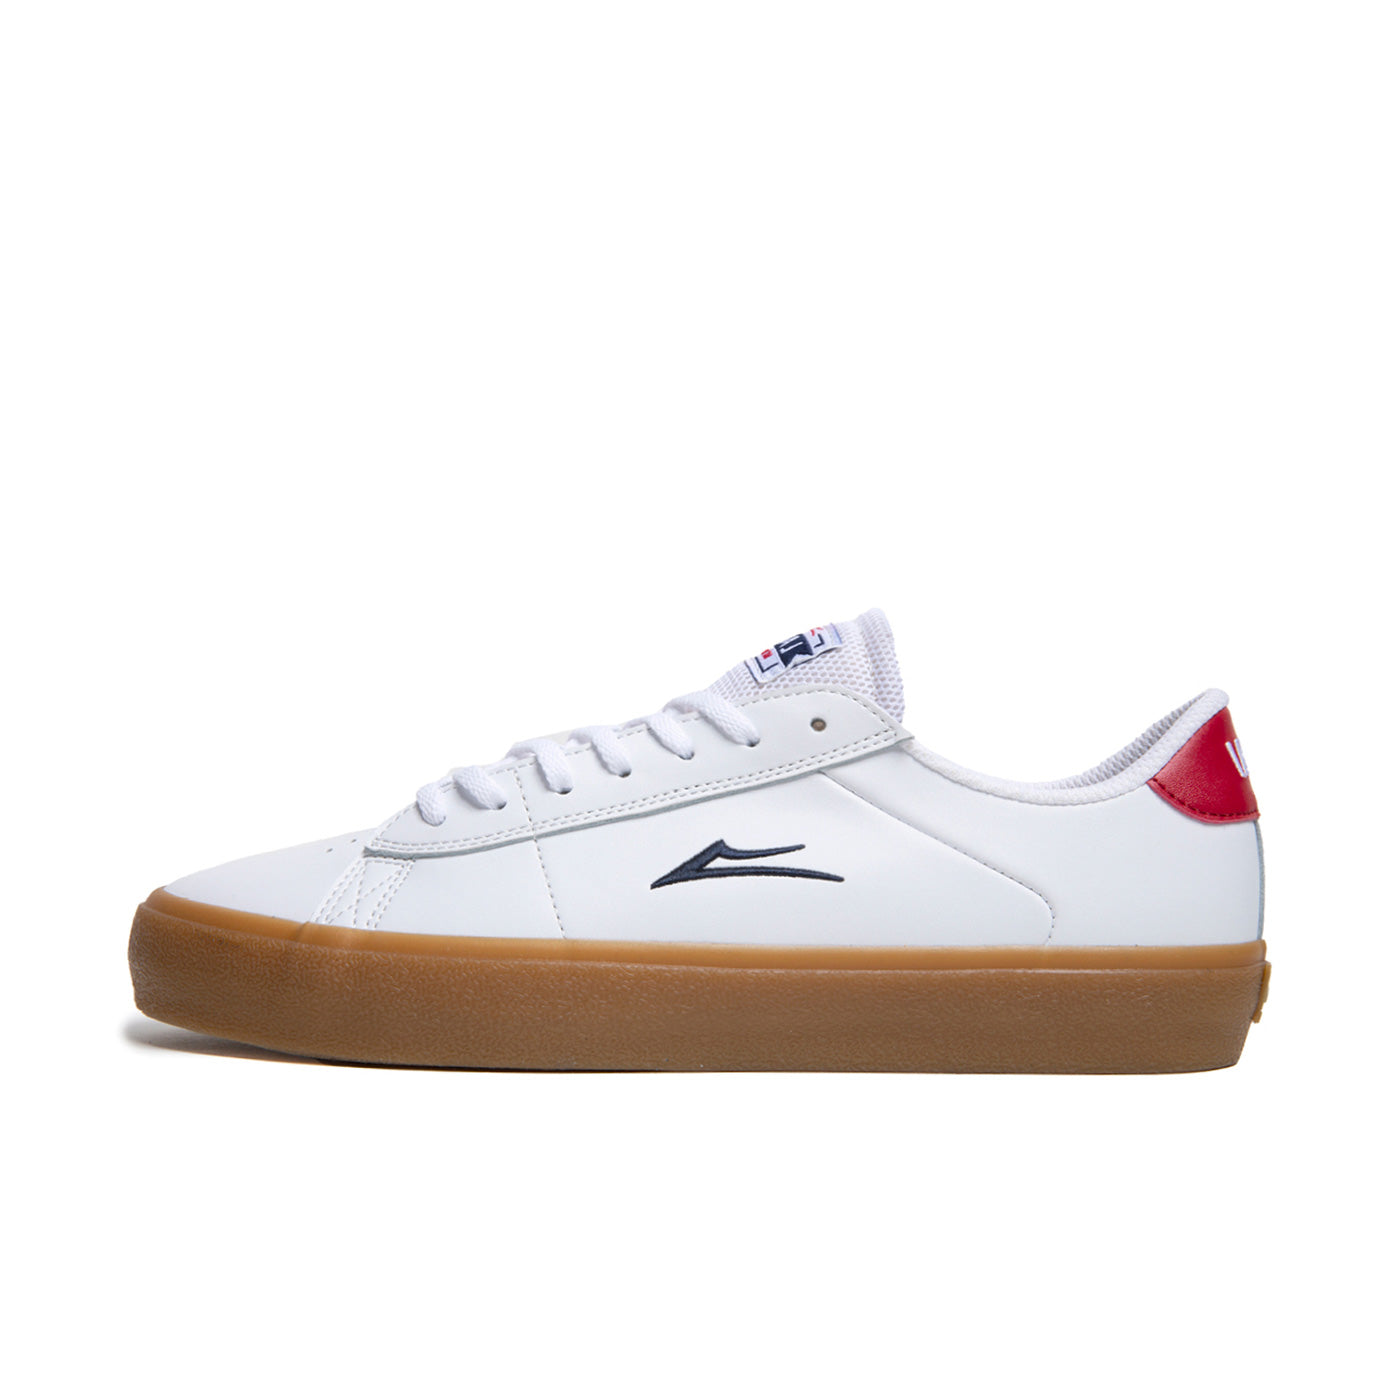 Low top Lakai Newport skate shoes, in white leather with small navy blue lakai logo on side and gum sole.